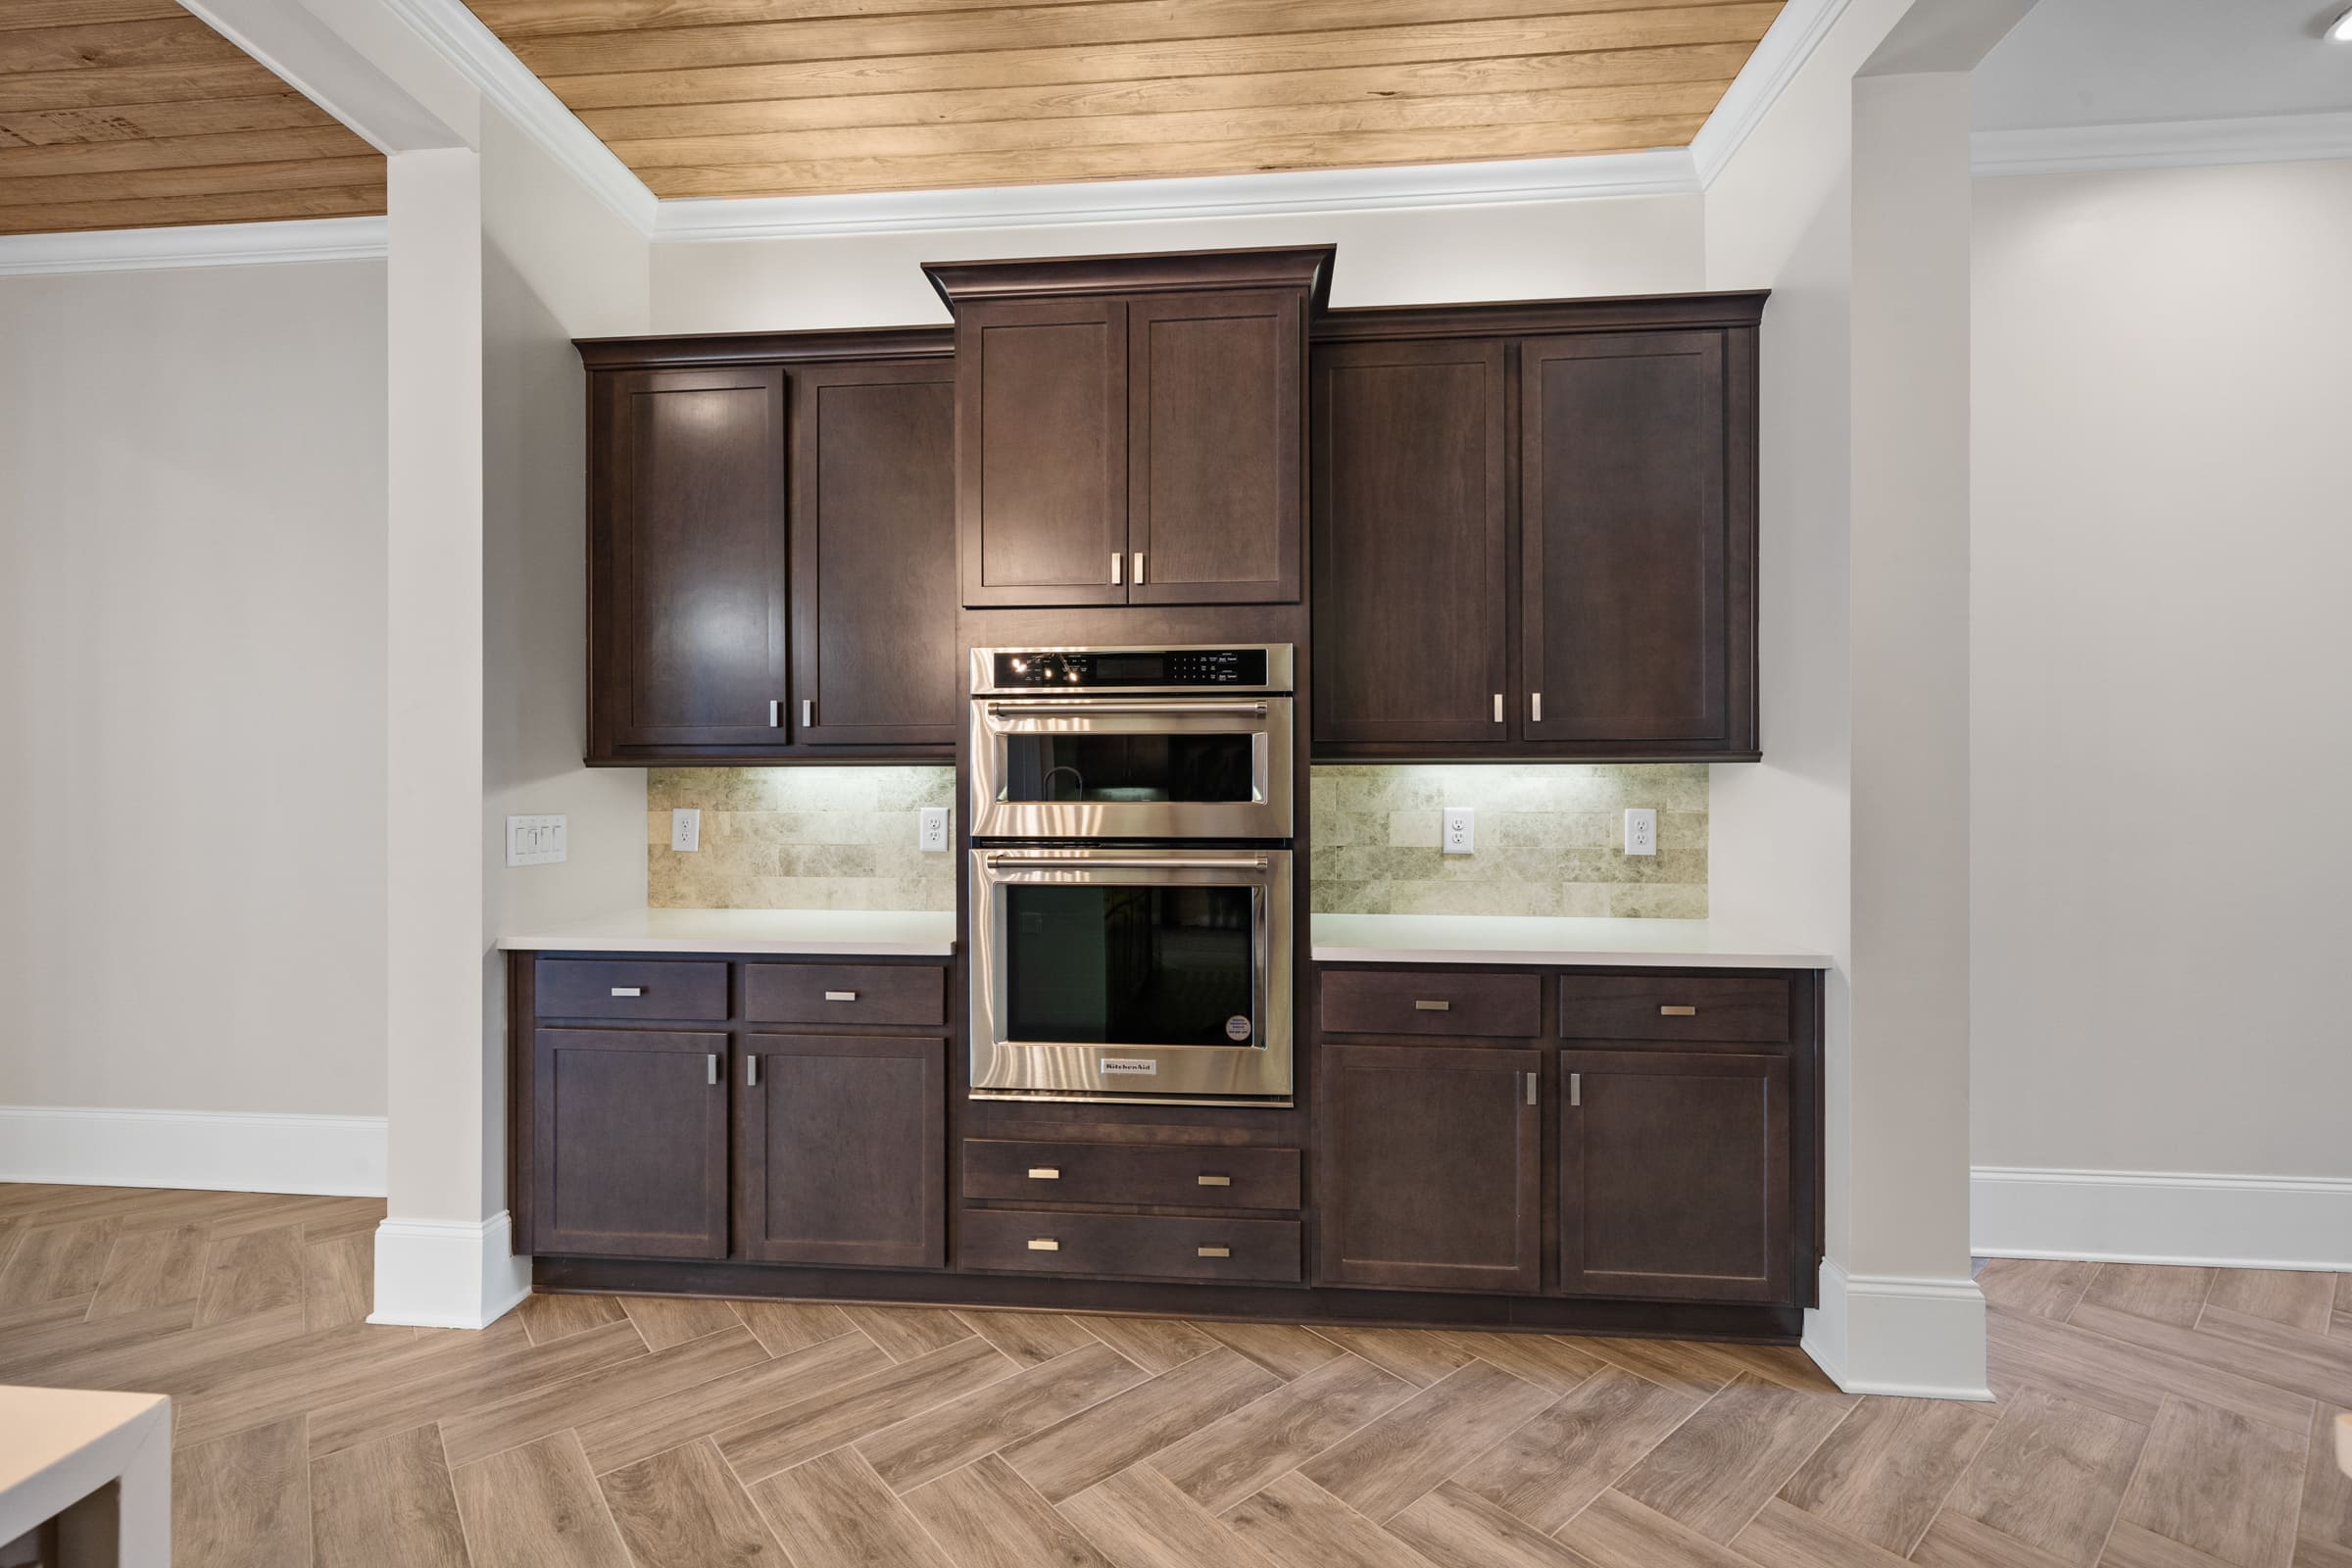 Stainless Steel Oven and Hardwood Cabinetry